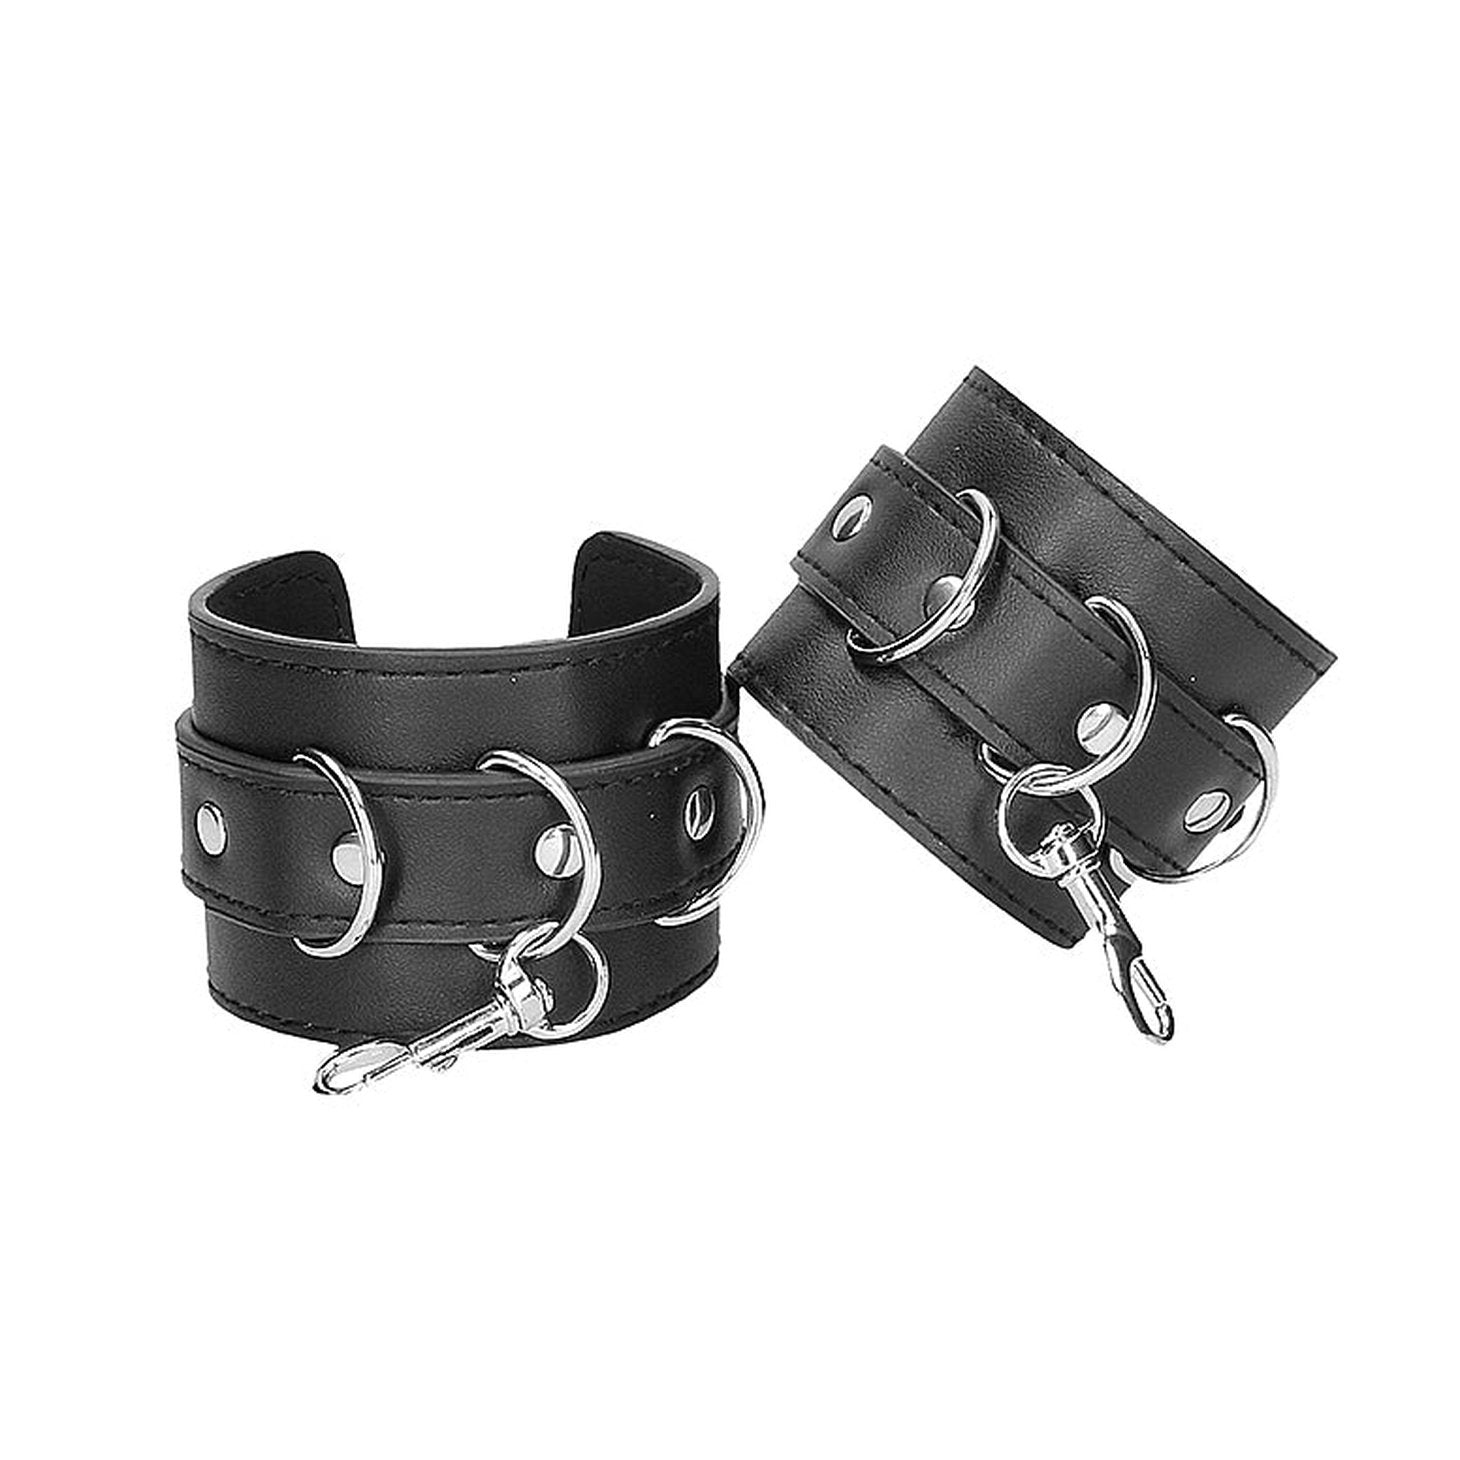 Leather Hand and Leg Cuffs Hogtie Set in Pelle Ouch!